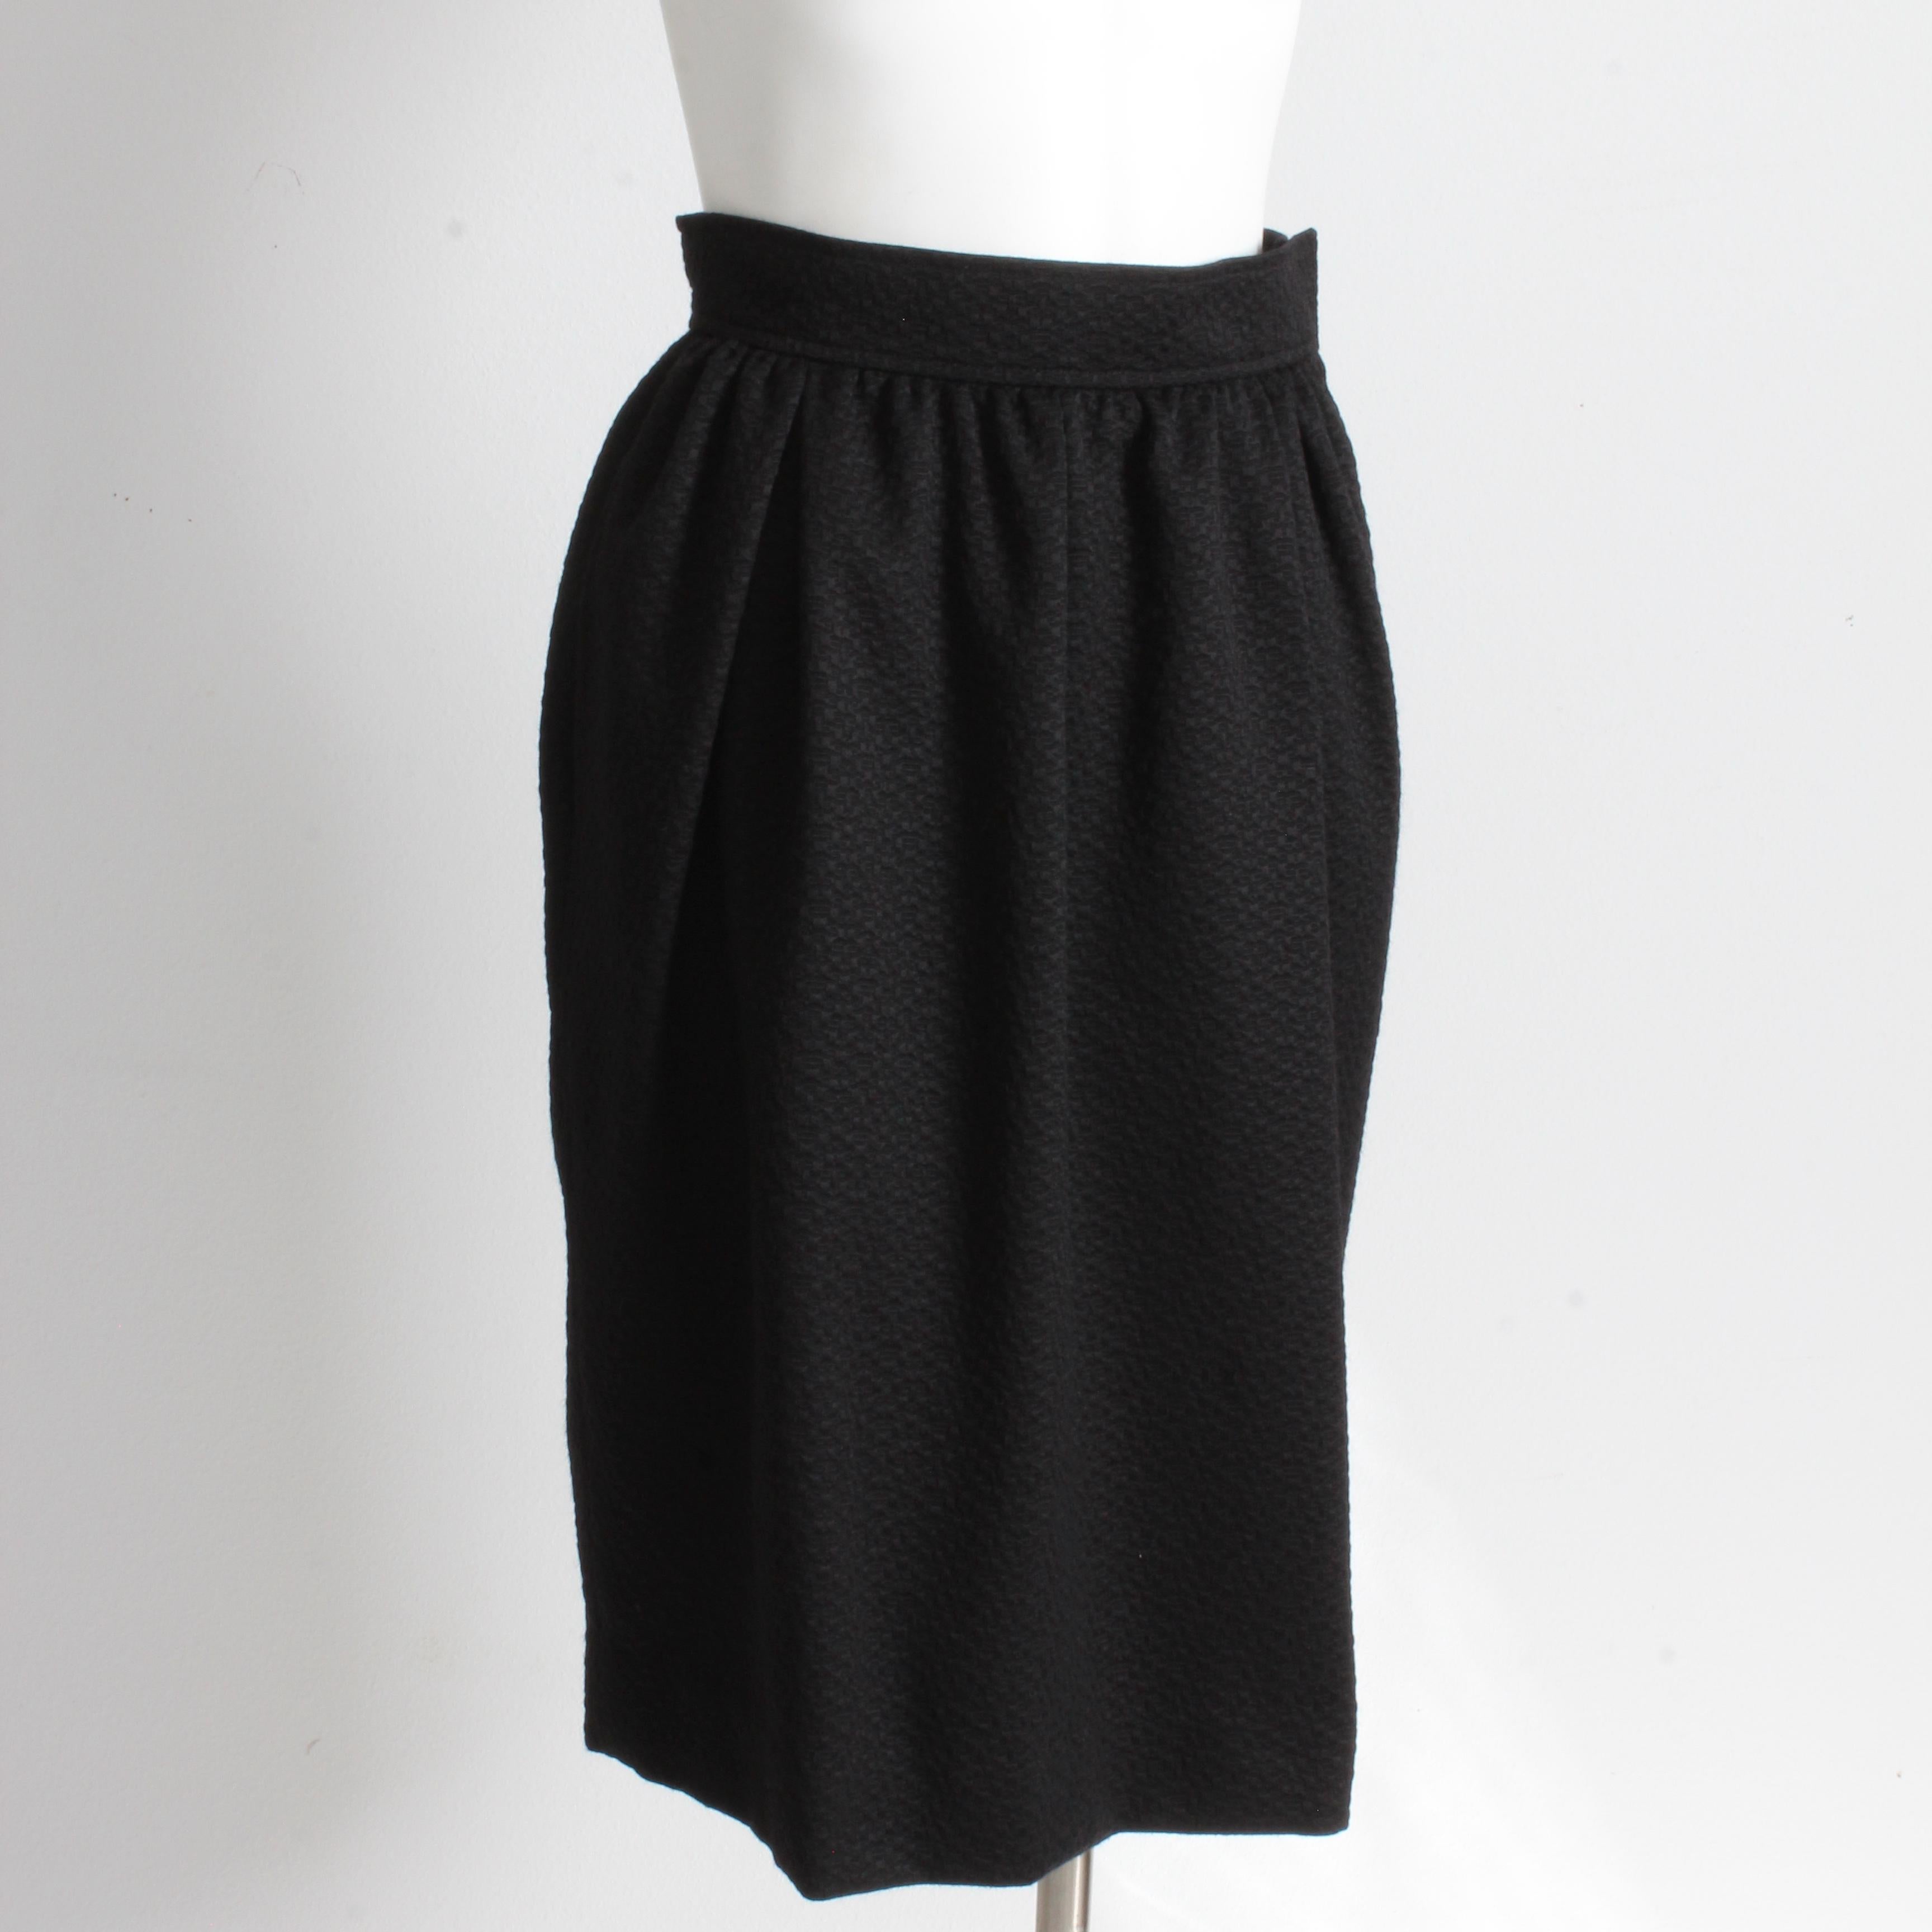 Yves Saint Laurent Skirt Pencil Black Textured Knit YSL Rive Gauche Size 38 90s In Good Condition For Sale In Port Saint Lucie, FL